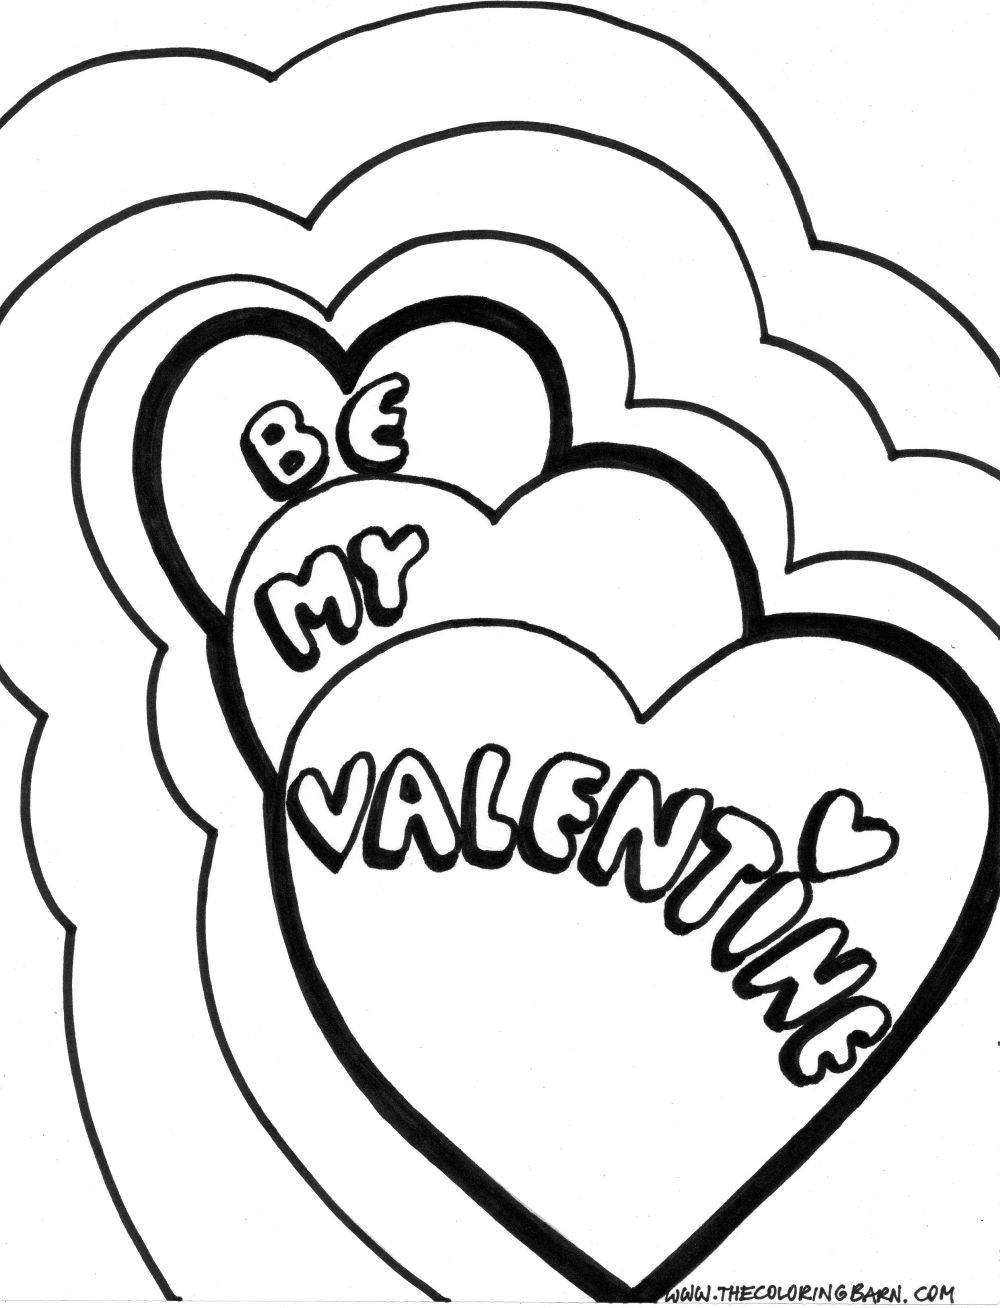 4-free-adult-coloring-pages-for-valentine-s-day-that-will-bring-out